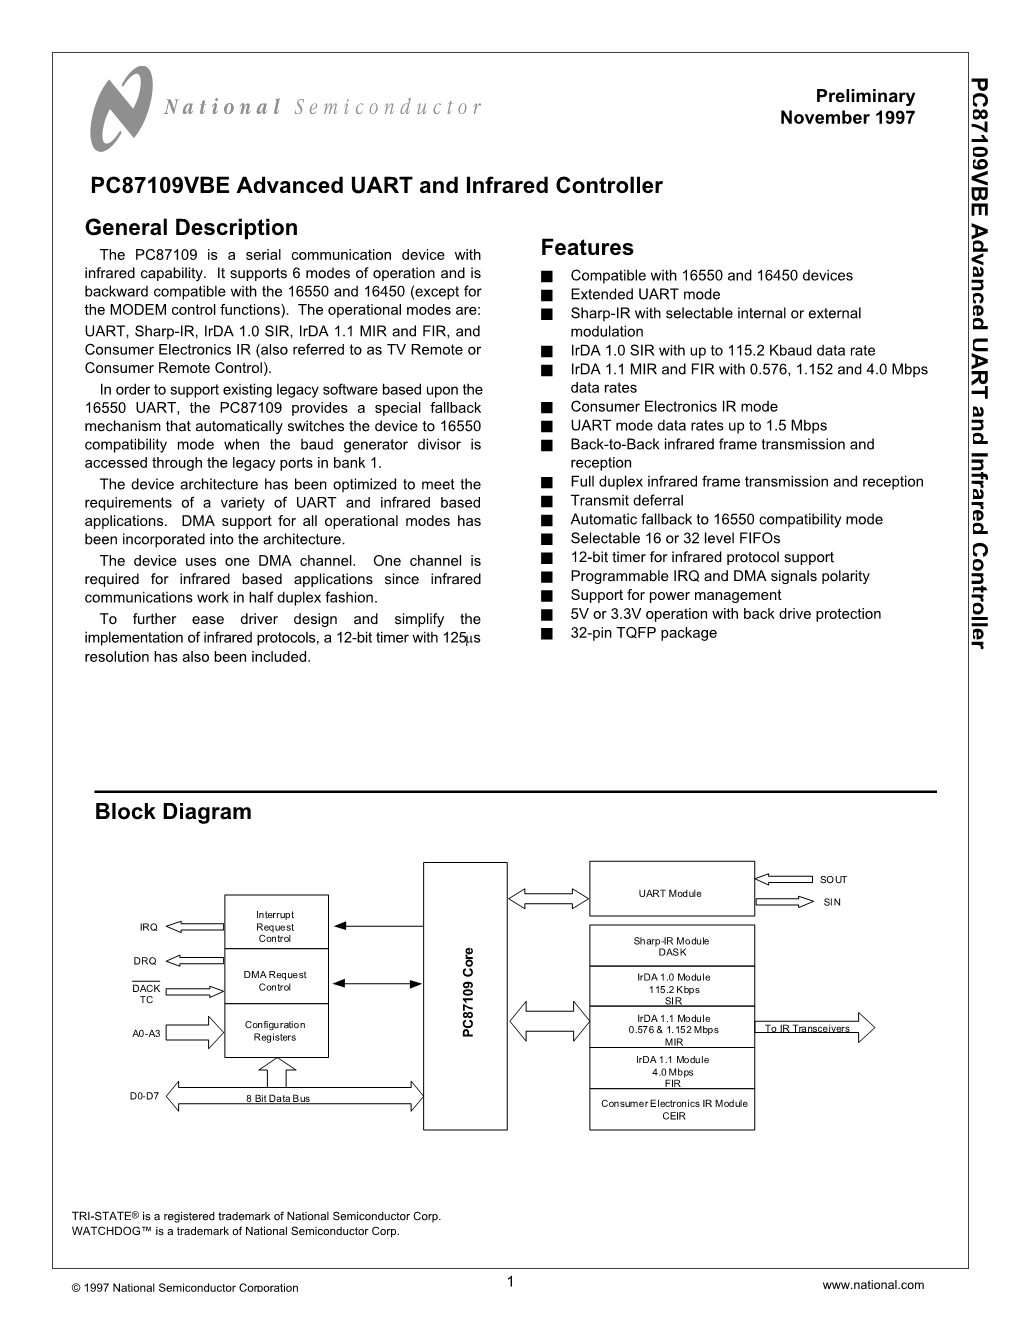 PC87109 Advanced UART and Infrared Controller